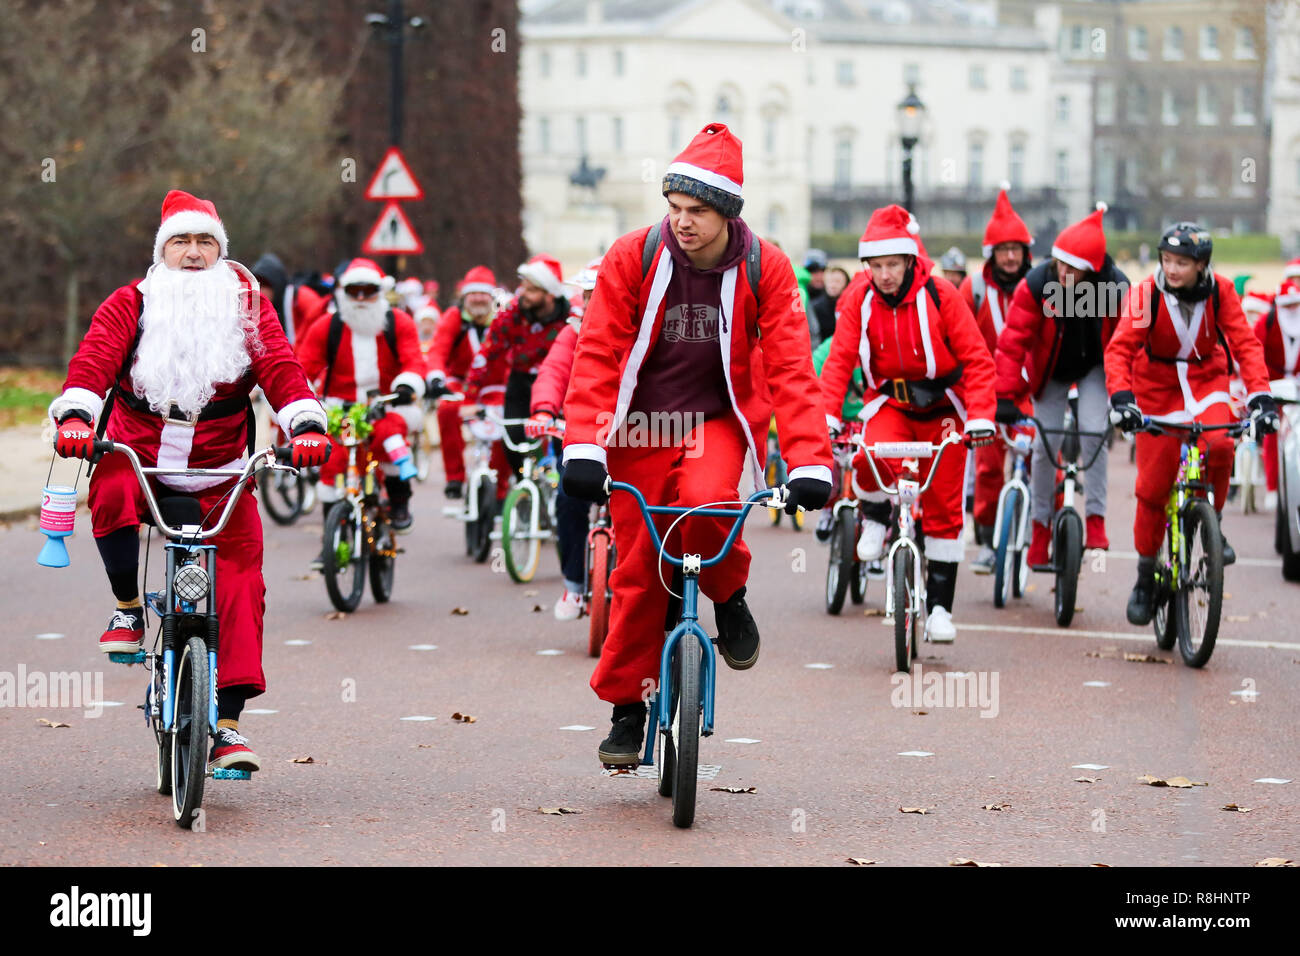 London, UK. 15th Dec, 2018. People dressed as Father Christmas are seen before cycling during the event.Cycling through London to raise awareness and money for Evelina London Children's Hospital (ECHO), for children with heart conditions. The annual event began four years ago after Stephane Wright's son Tommy, suffered a heart attack and spent time at Evelina London. Tommy was only 6 months old when he suffered a heart attack and nearly died. Fortunately Tommy recovered well but will require further operations as he grows up, so will be returning to the Evelina London in ti Stock Photo